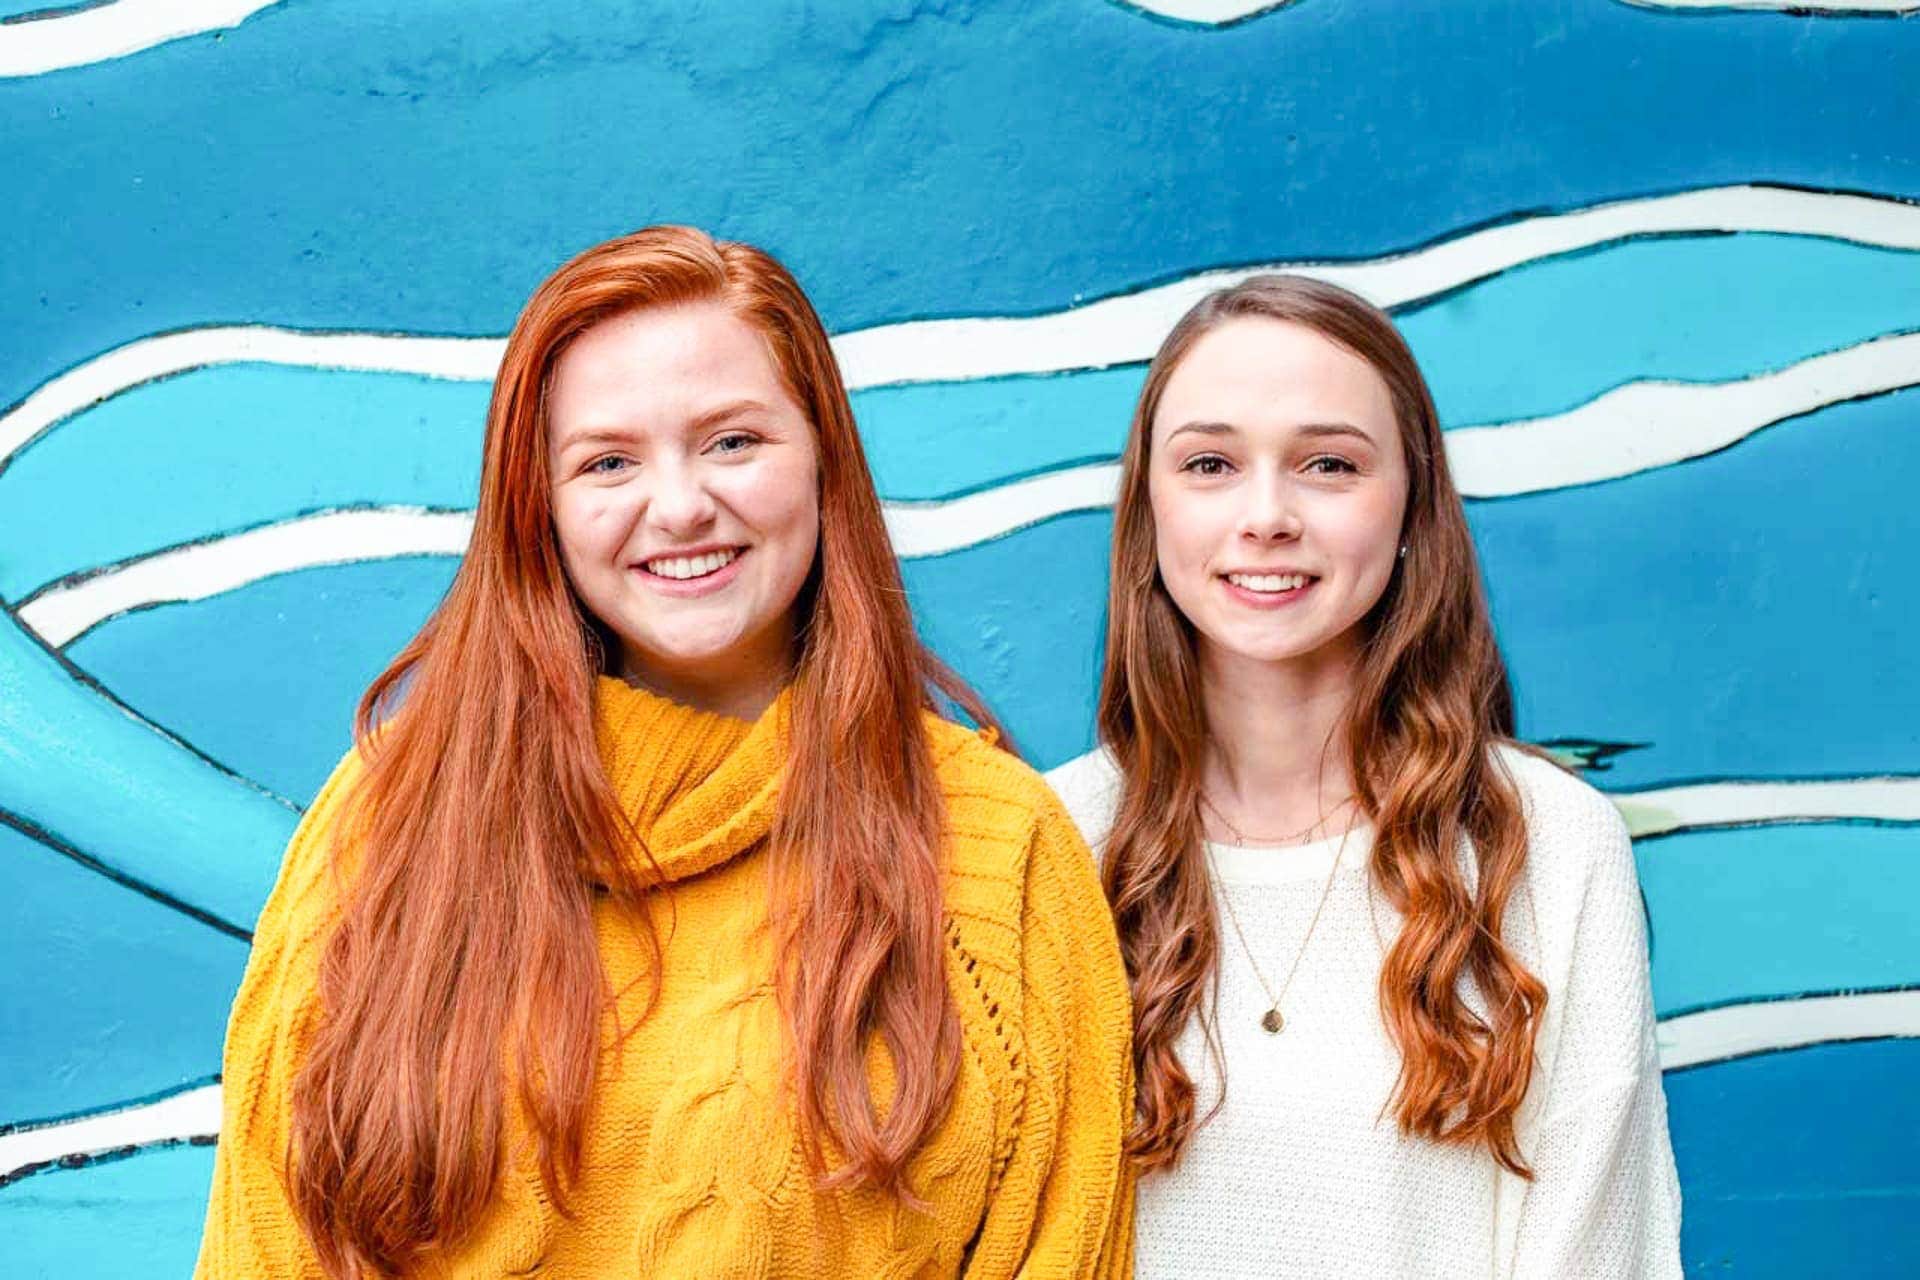 Kate Dye and Madison Matheny will lead the WVU Student Government Association for the 2019-20 academic year.